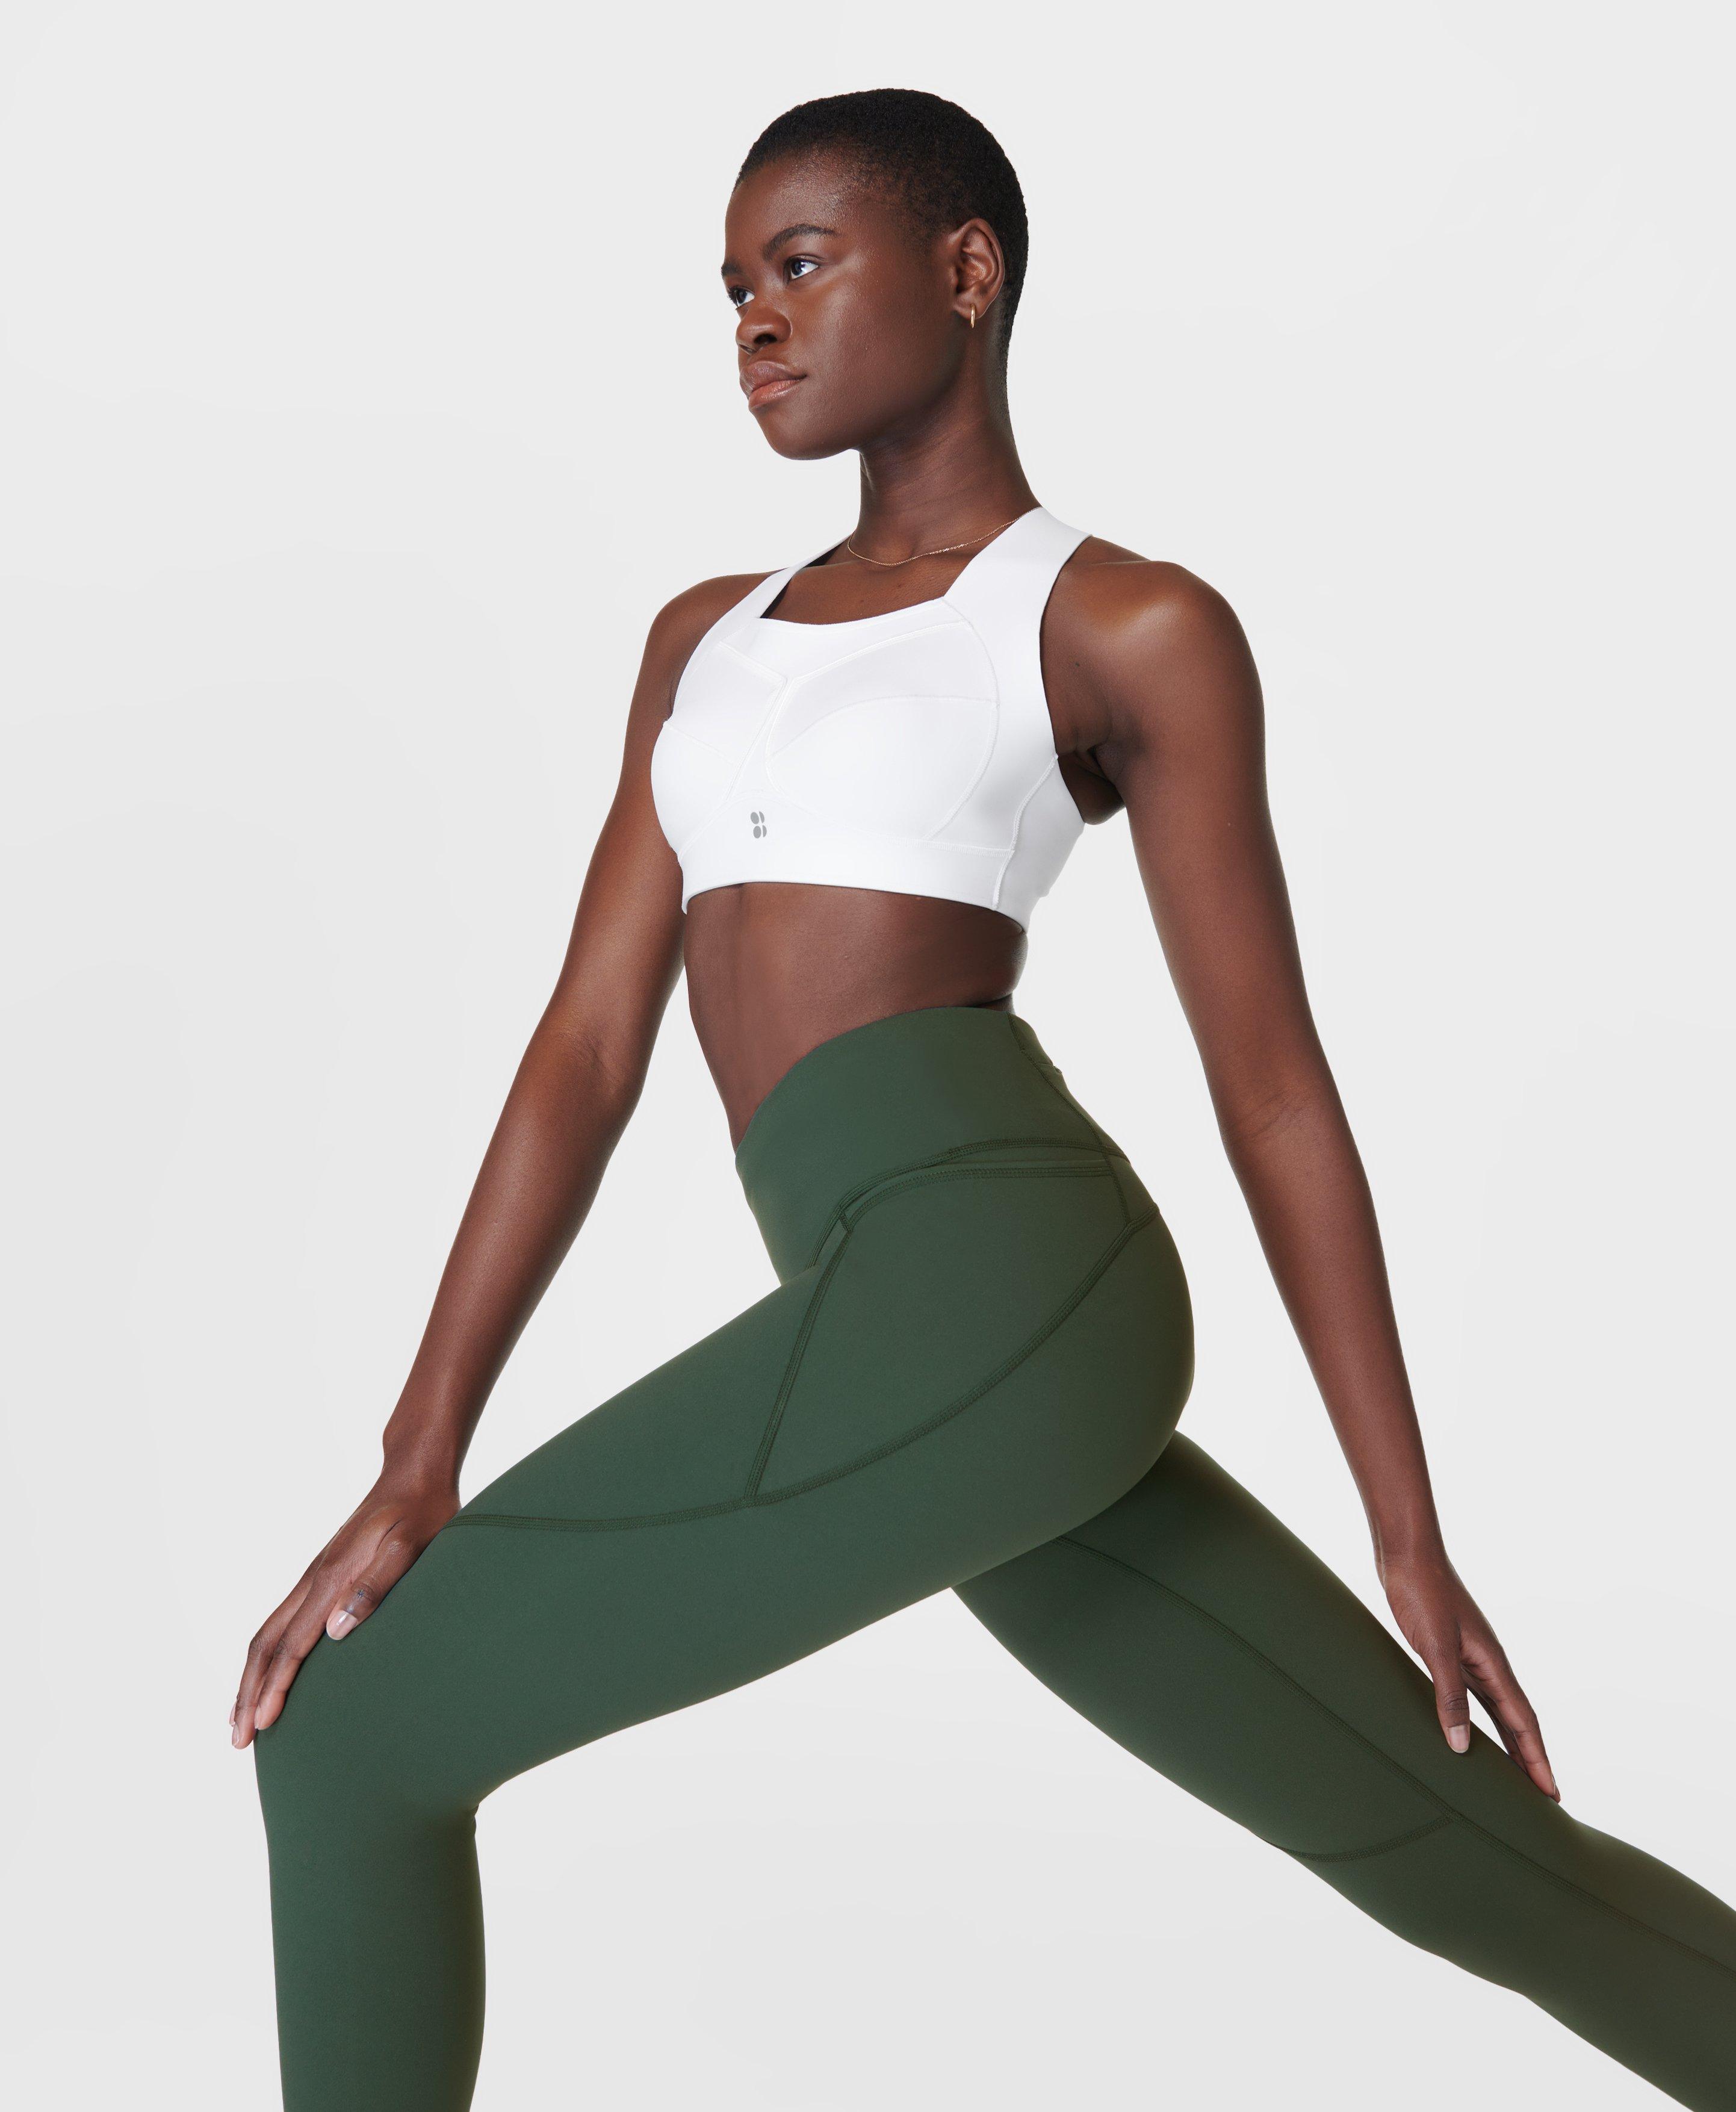 The Leggings Workout: Sprint Your Way Slim